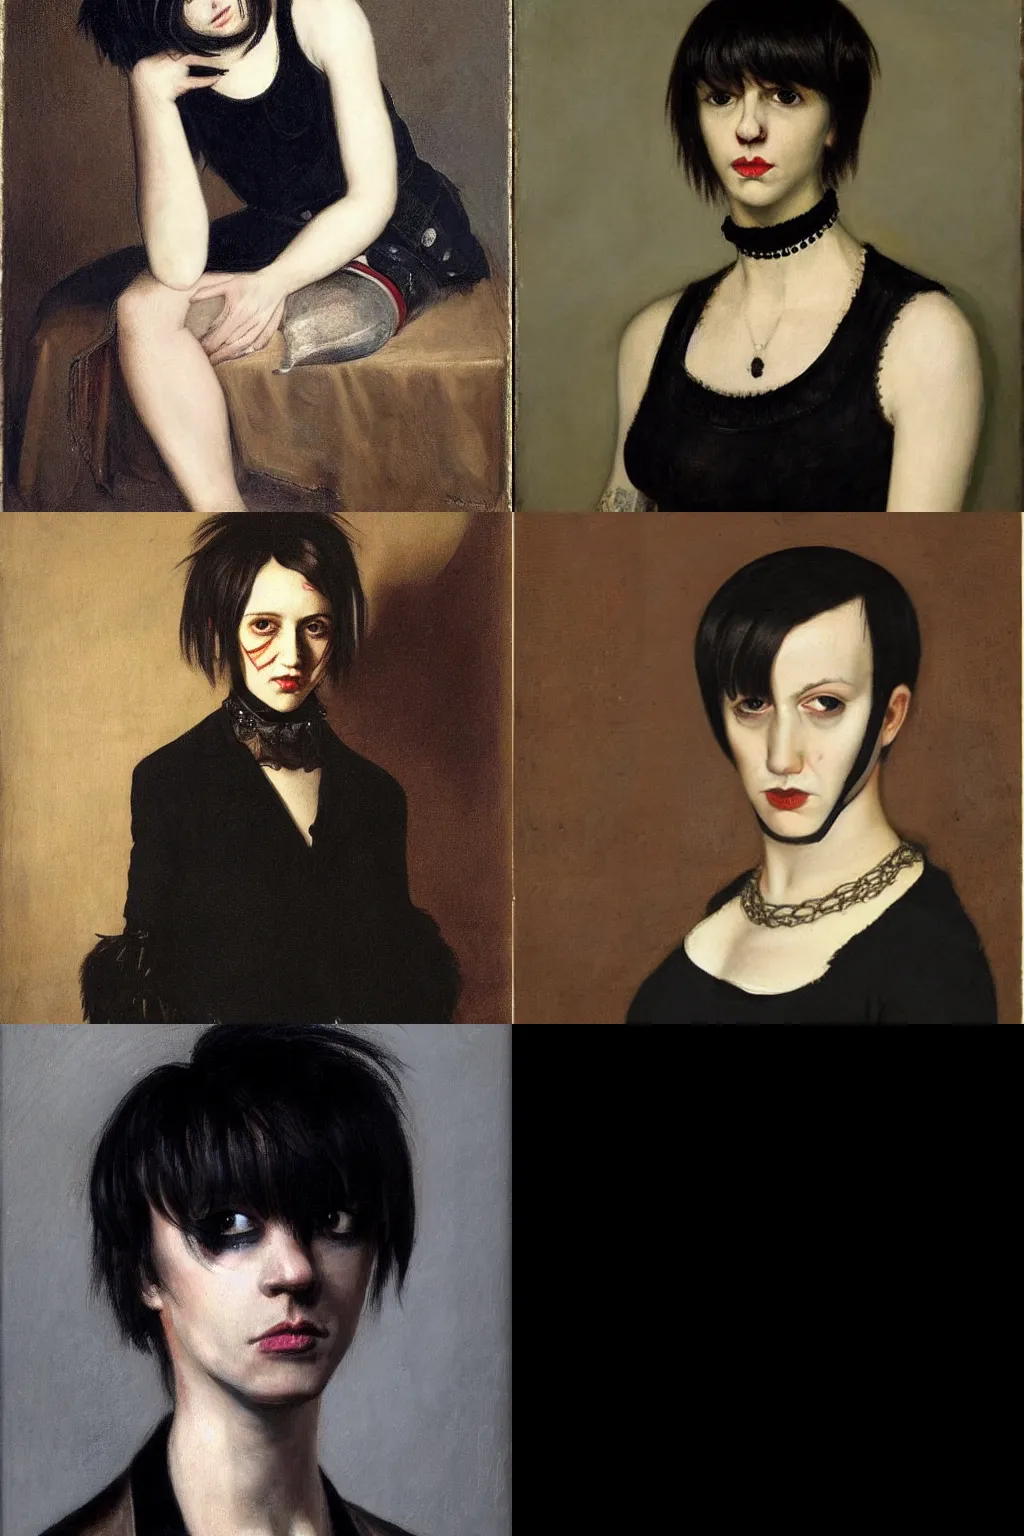 Prompt: an emo portrait by pieter aertsen. her hair is dark brown and cut into a short, messy pixie cut. she has a slightly rounded face, with a pointed chin, large entirely - black eyes, and a small nose. she is wearing a black tank top, a black leather jacket, a black knee - length skirt, and a black choker..